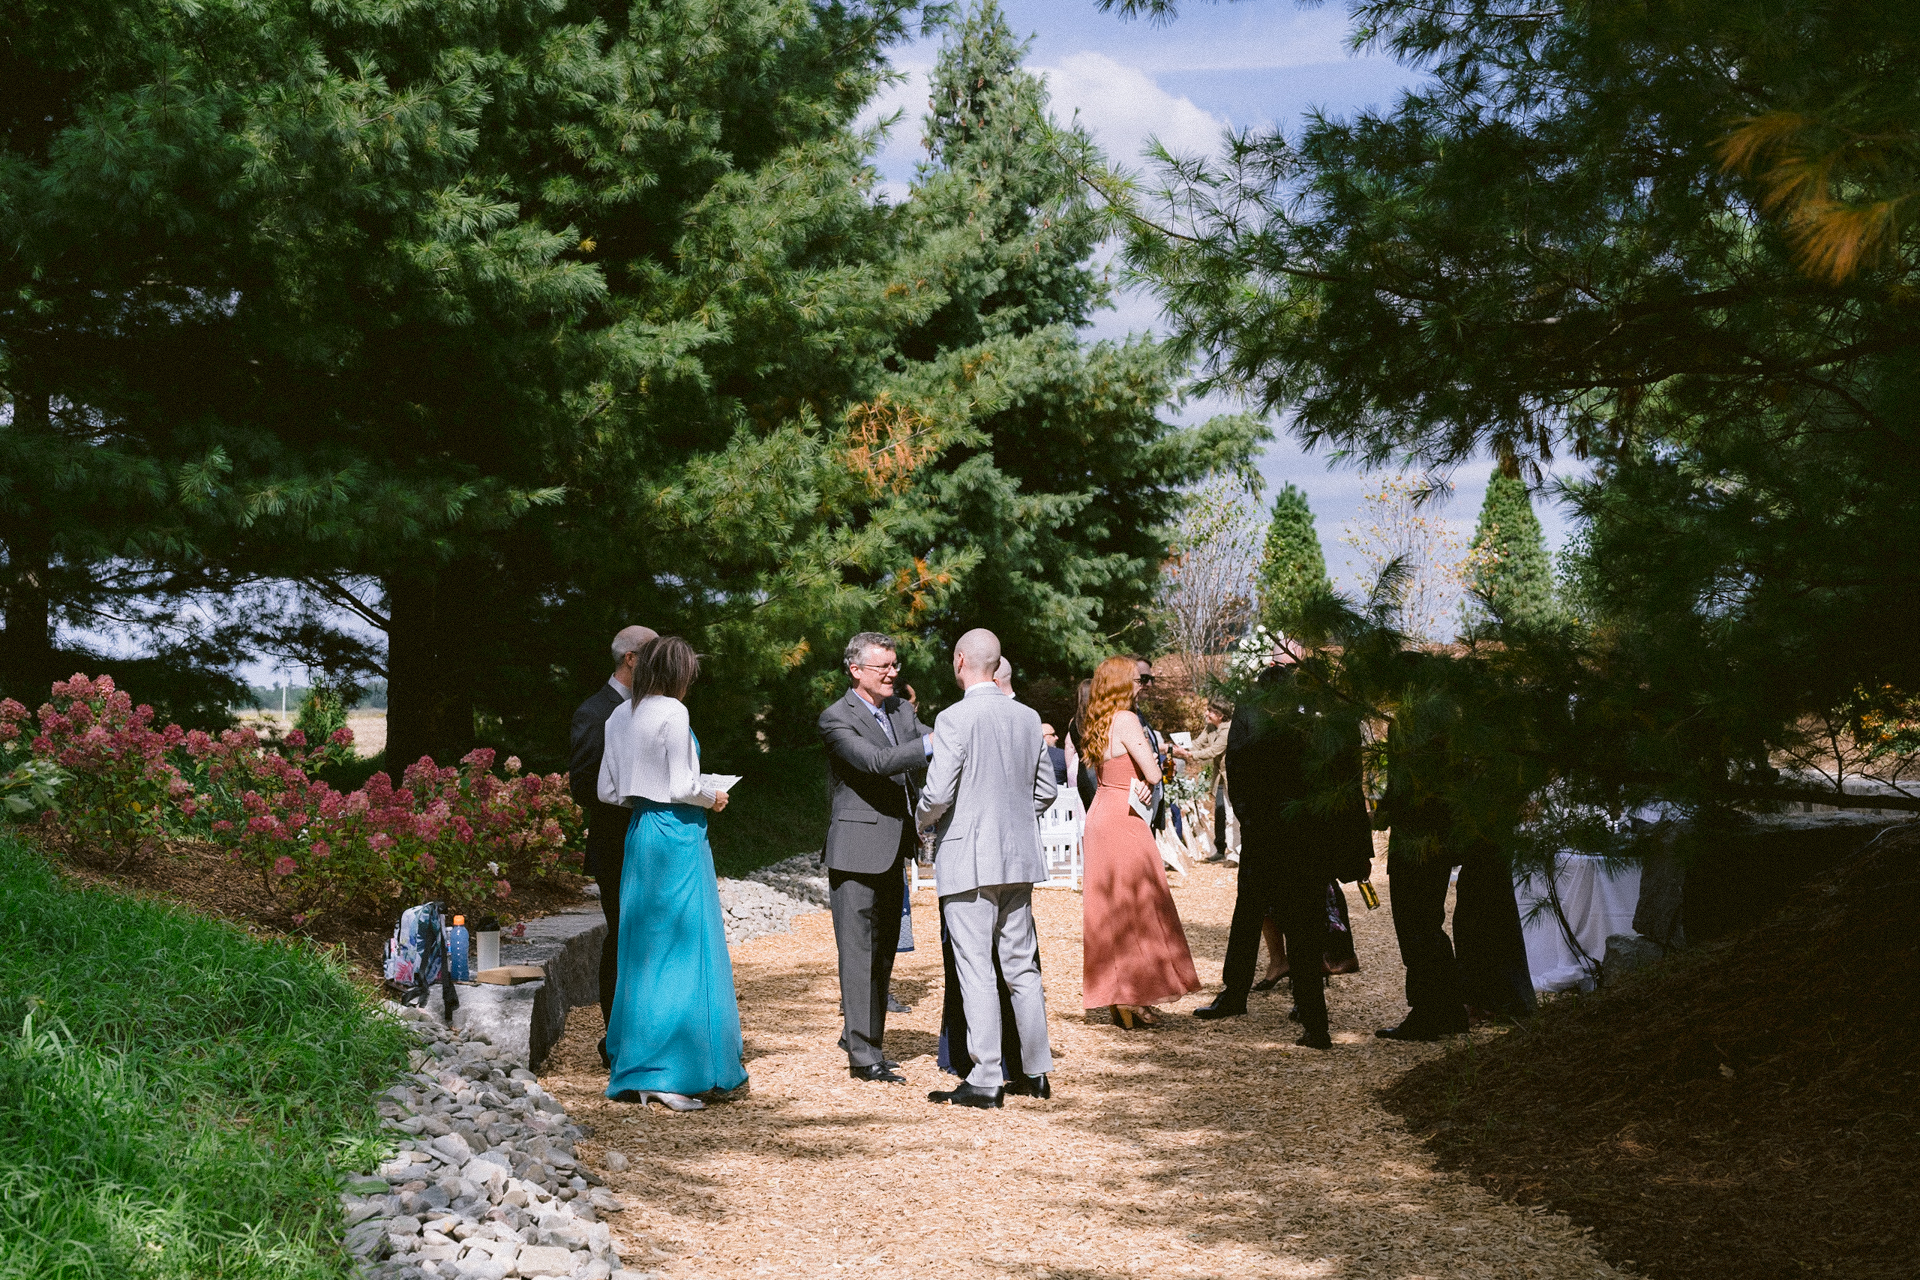 Guests gathered in a garden for a wedding, with trees and shrubs surrounding the area at Cambium Farms wedding.